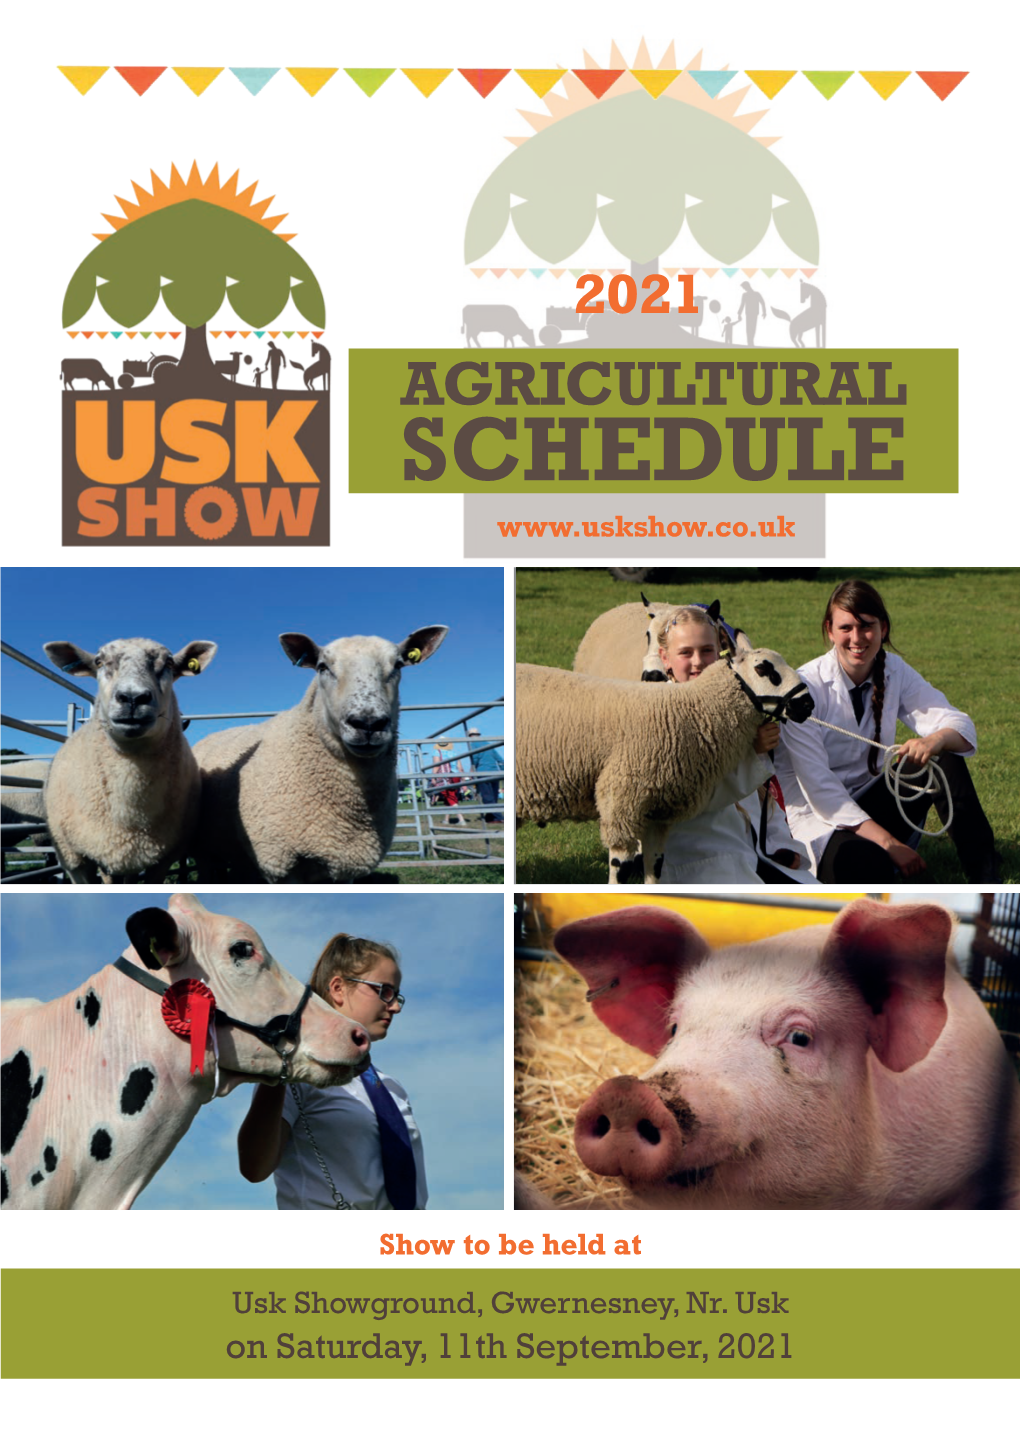 Click Here to Download the Agriculture Schedule for 2021